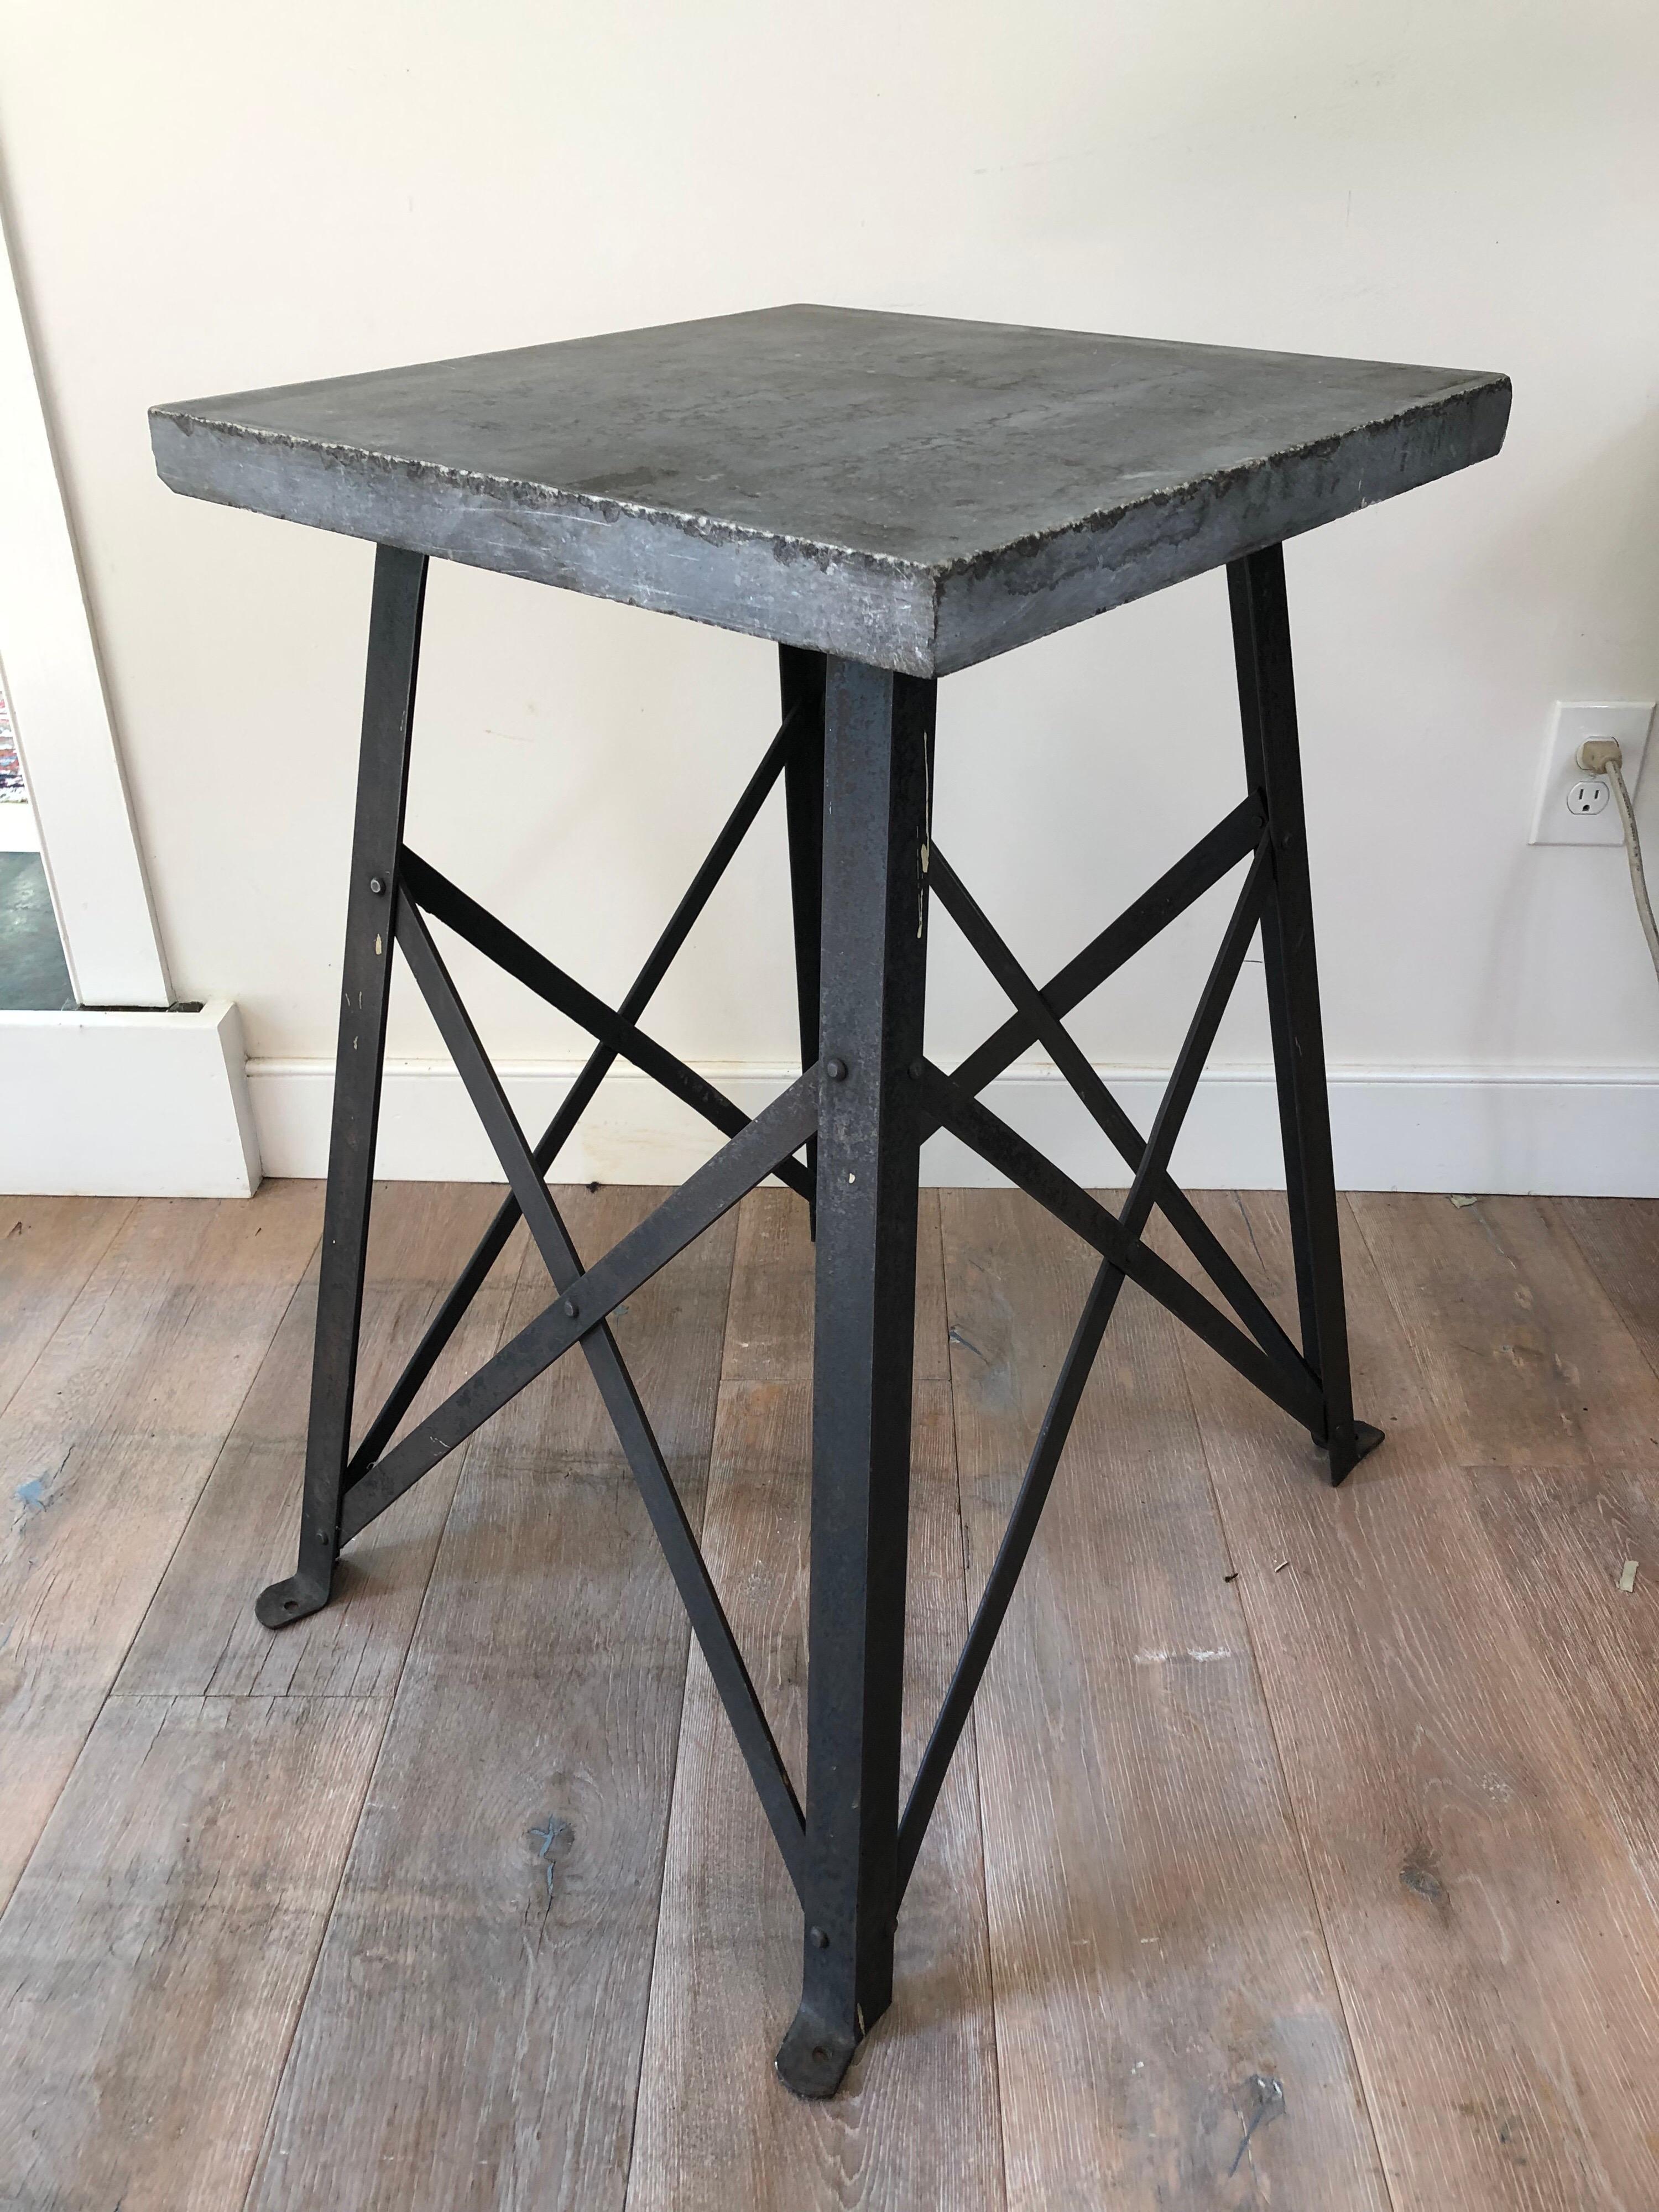 A vintage steel base trestle table or pedestal with slate top. Stone top measures 19.75